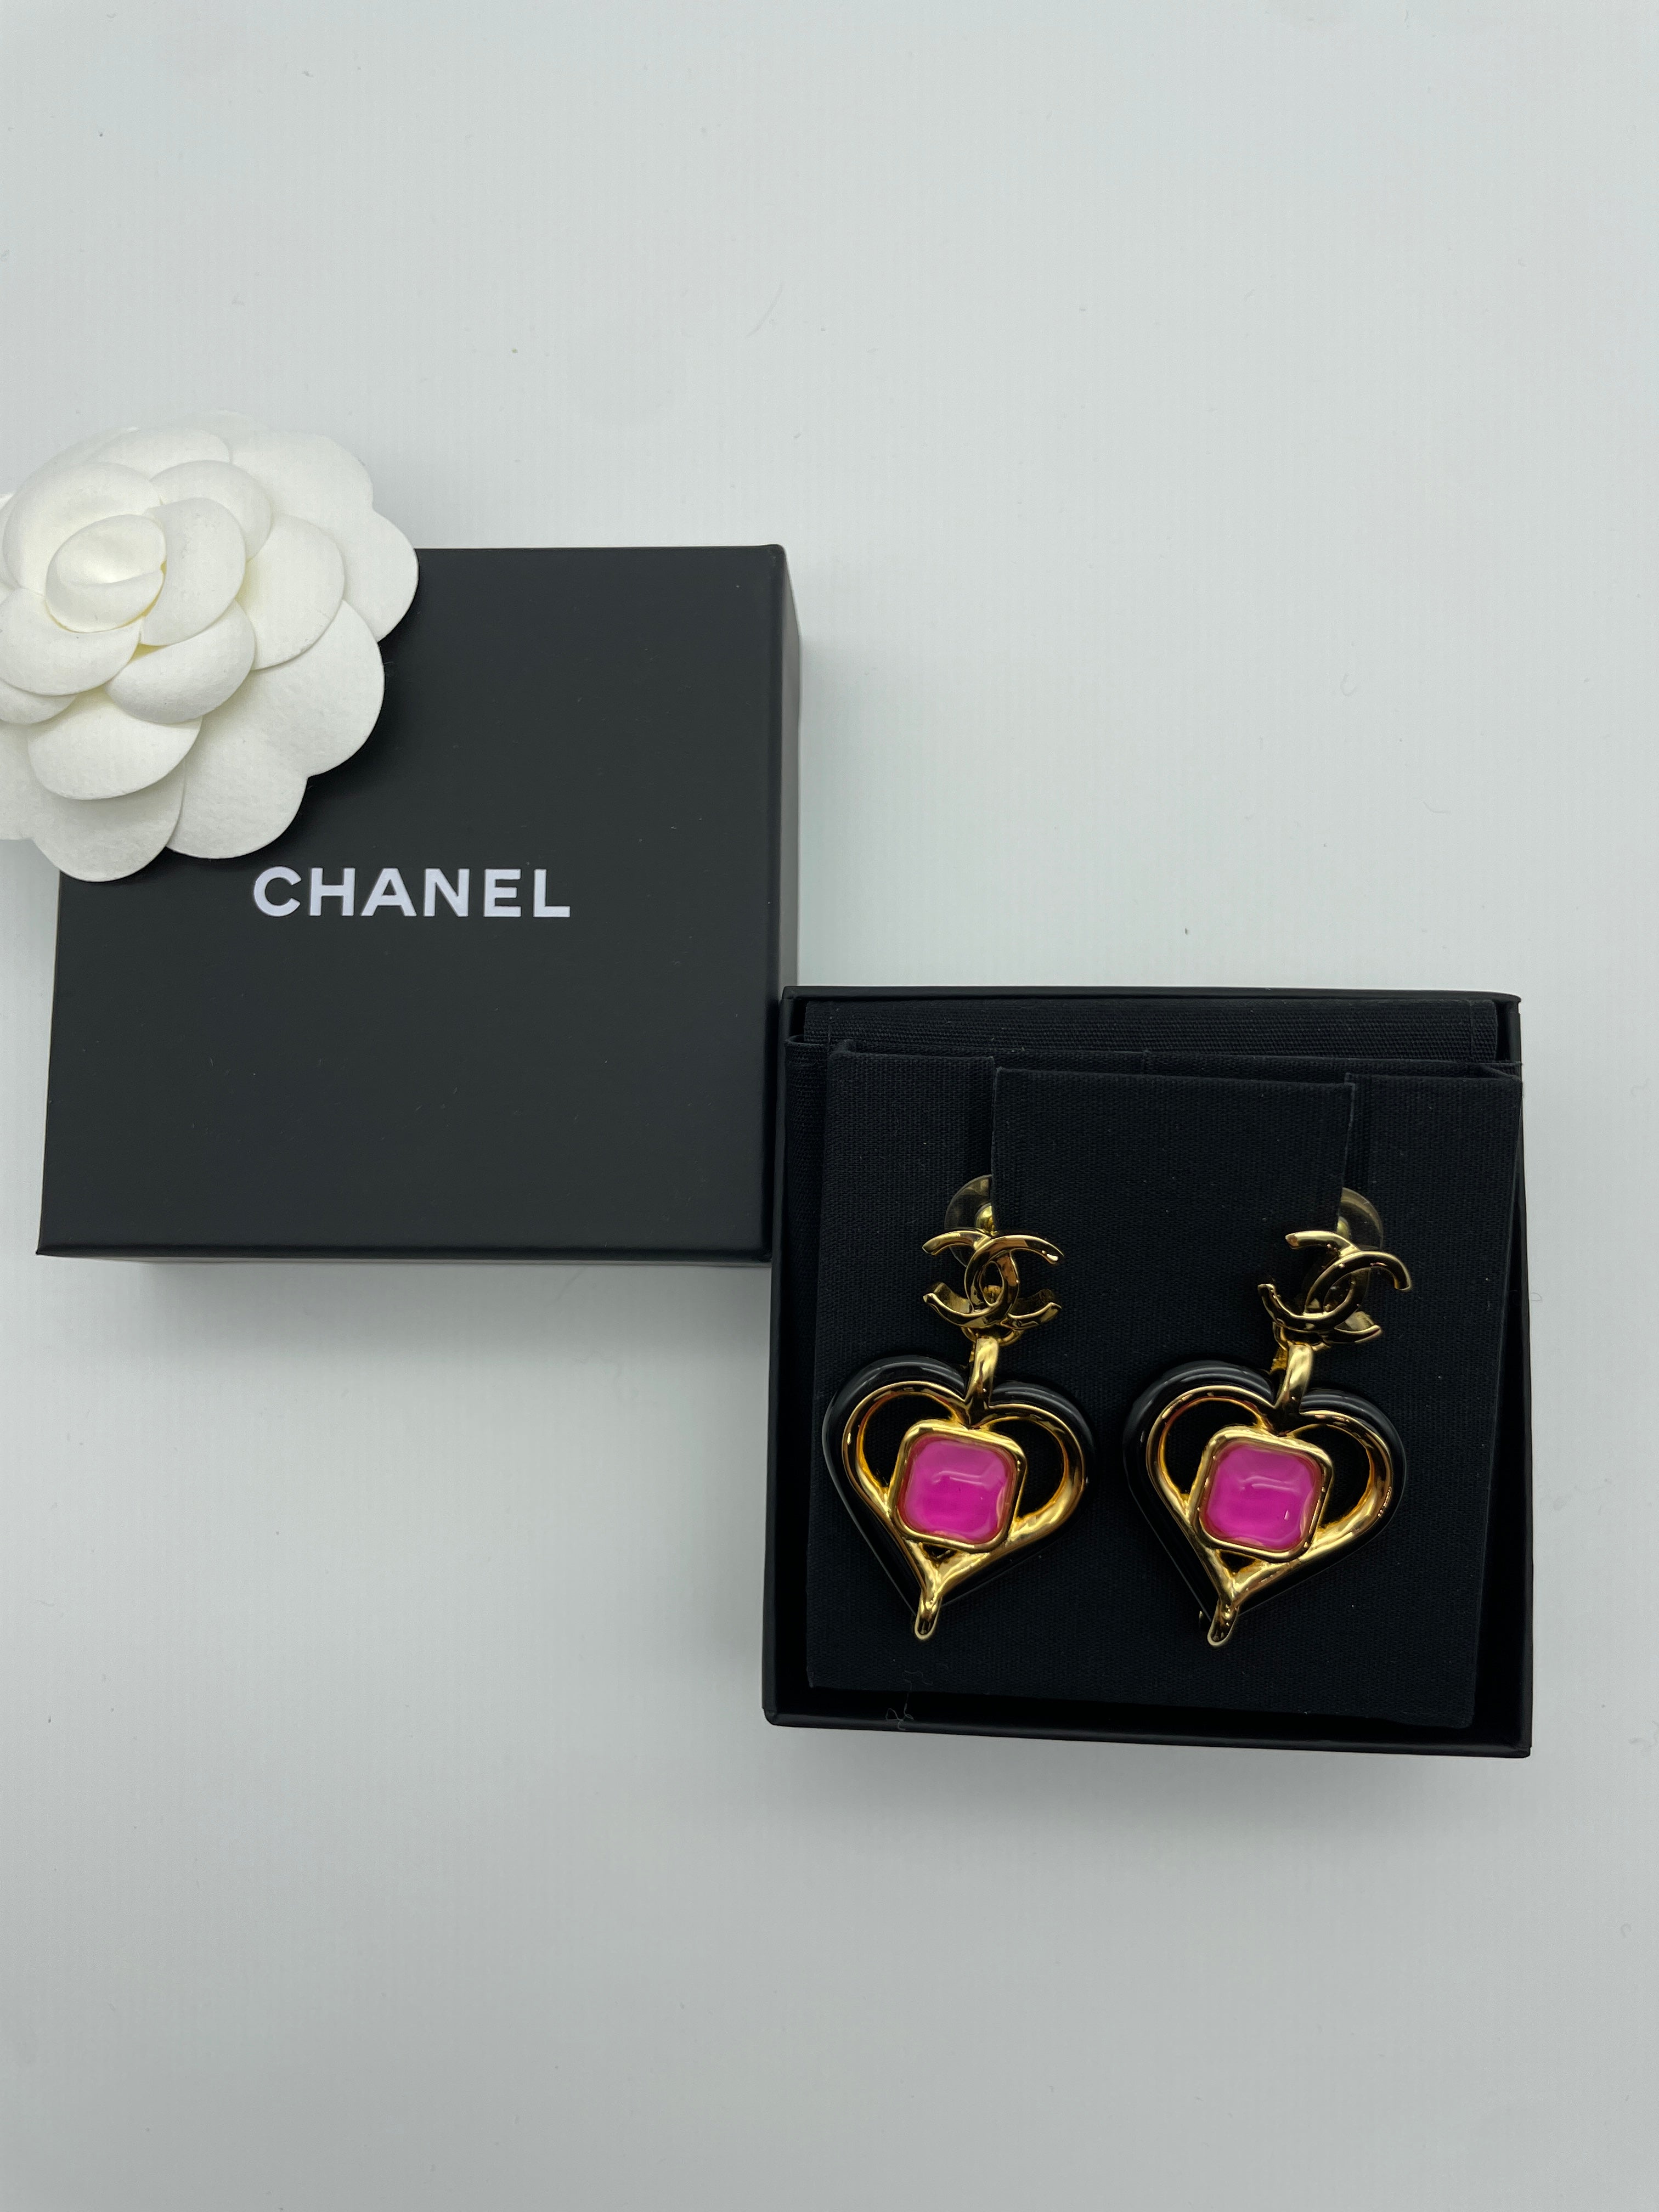 Authentic Chanel Black and Gold CC Resin Square Timeless Classic Earrings